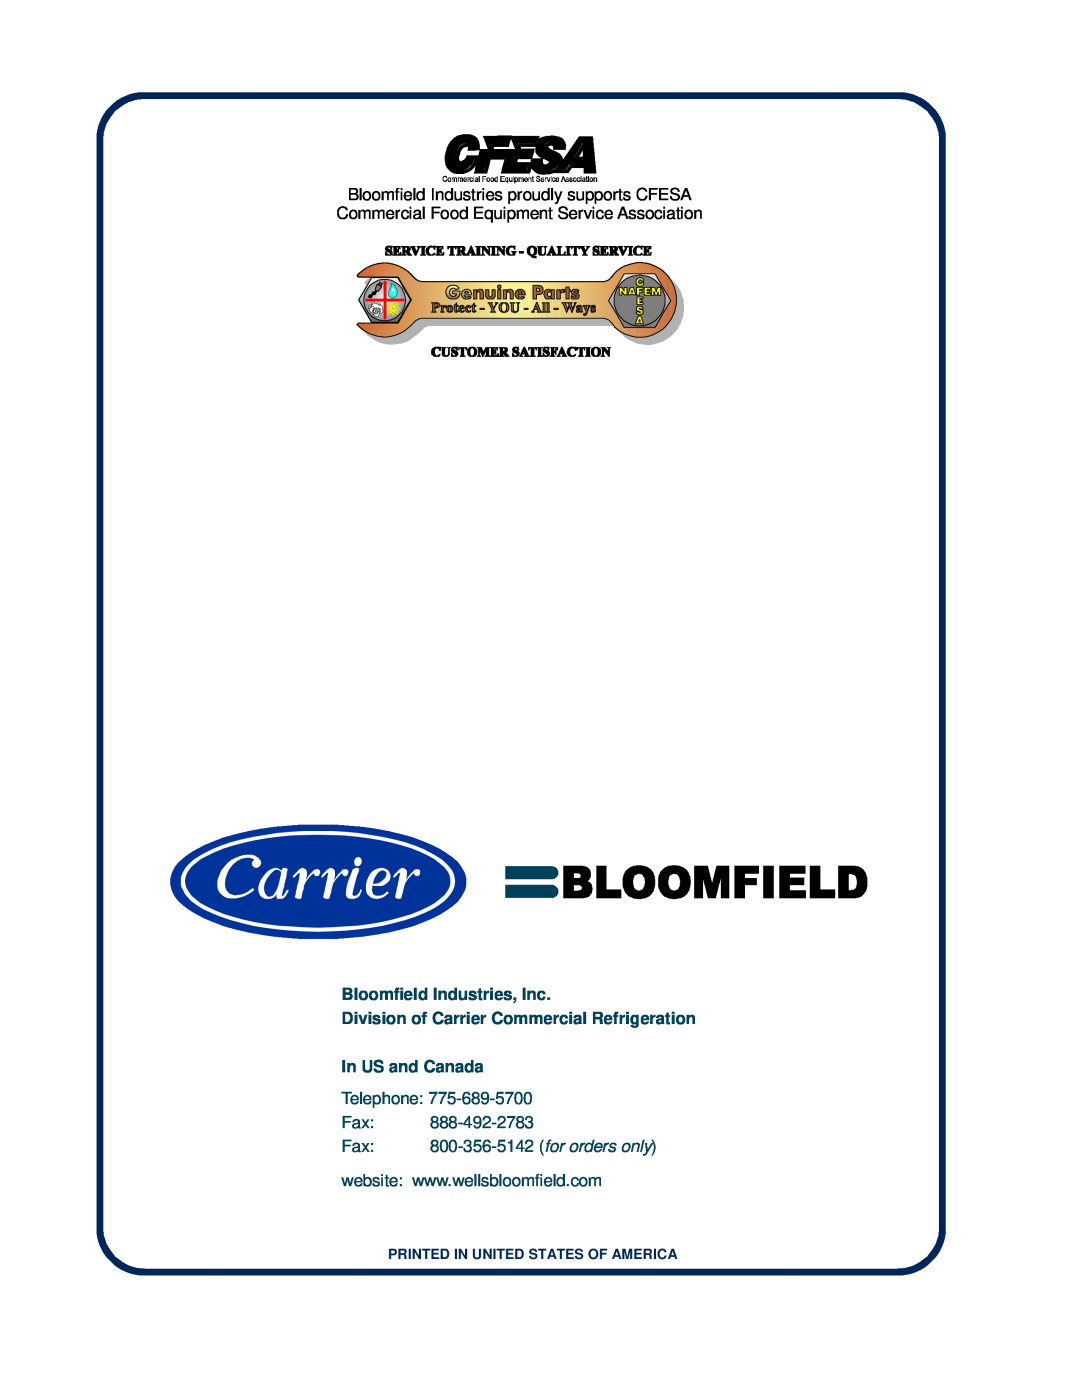 Bloomfield 8788, 8785 Bloomfield Industries, Inc, Division of Carrier Commercial Refrigeration In US and Canada, Telephone 